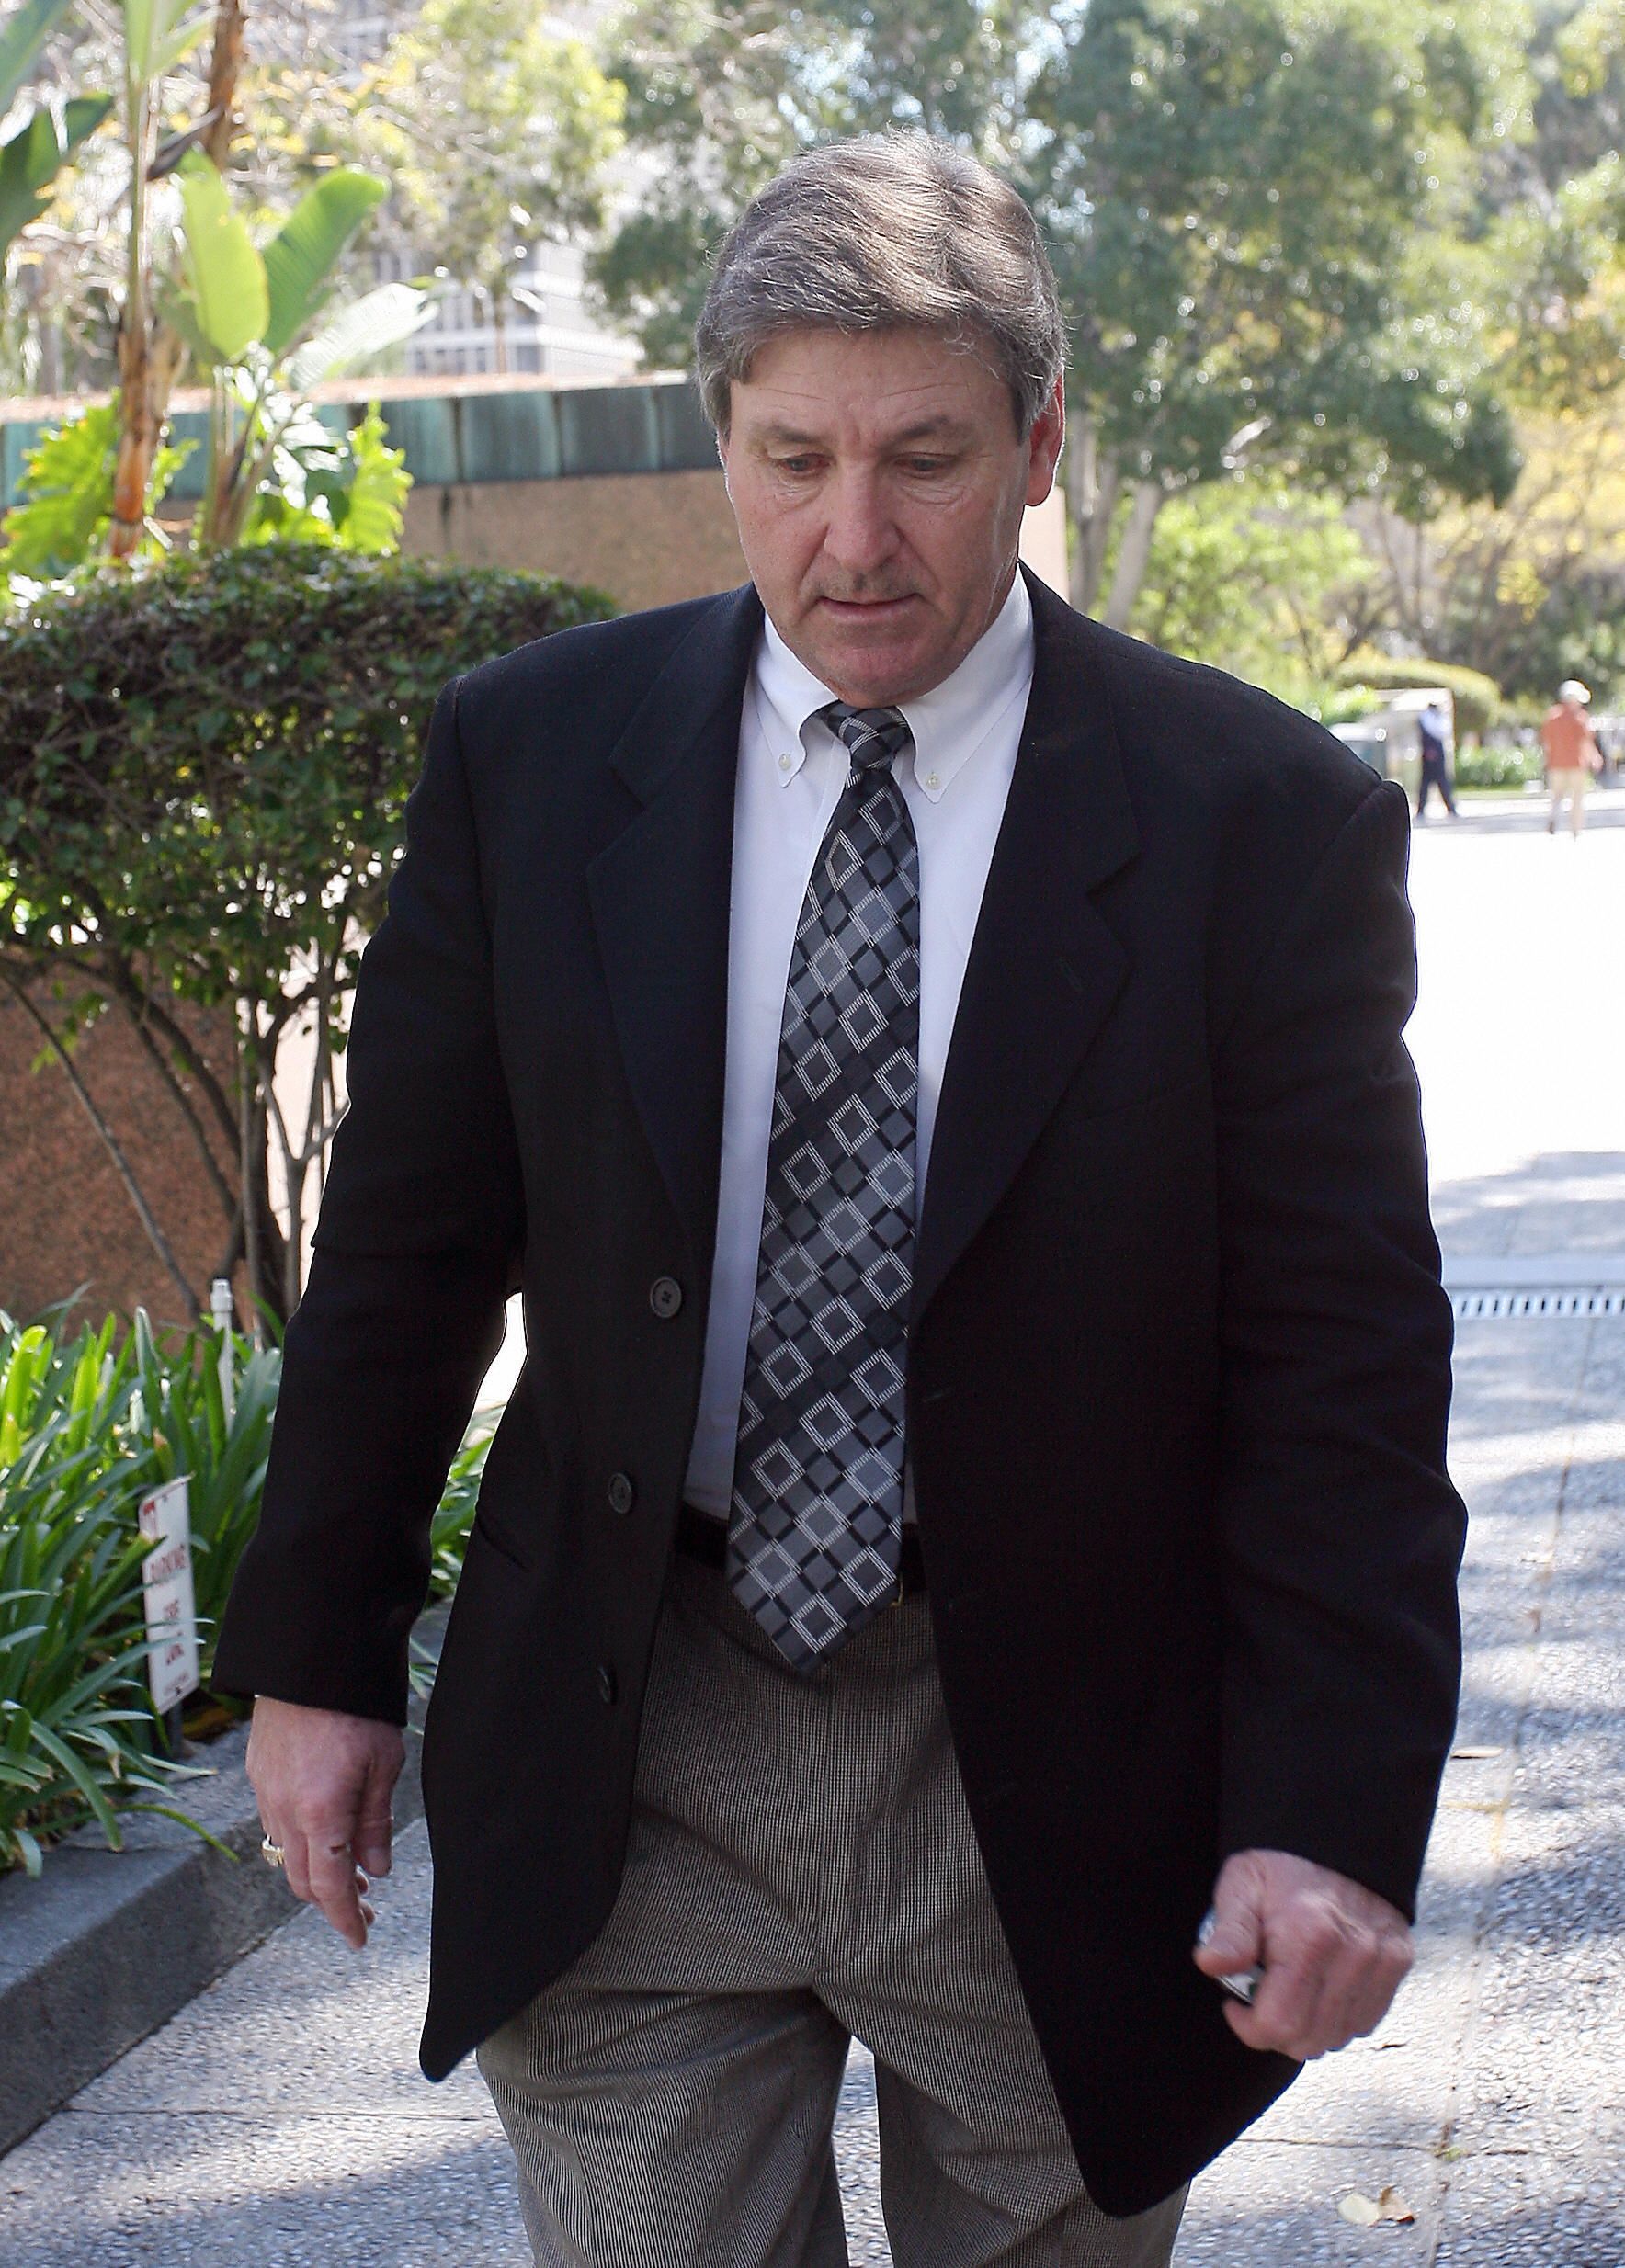 Britney Spears' father, Jamie Spears, at the Los Angeles County Superior courthouse on March 10, 2008 | Photo: Getty Images 